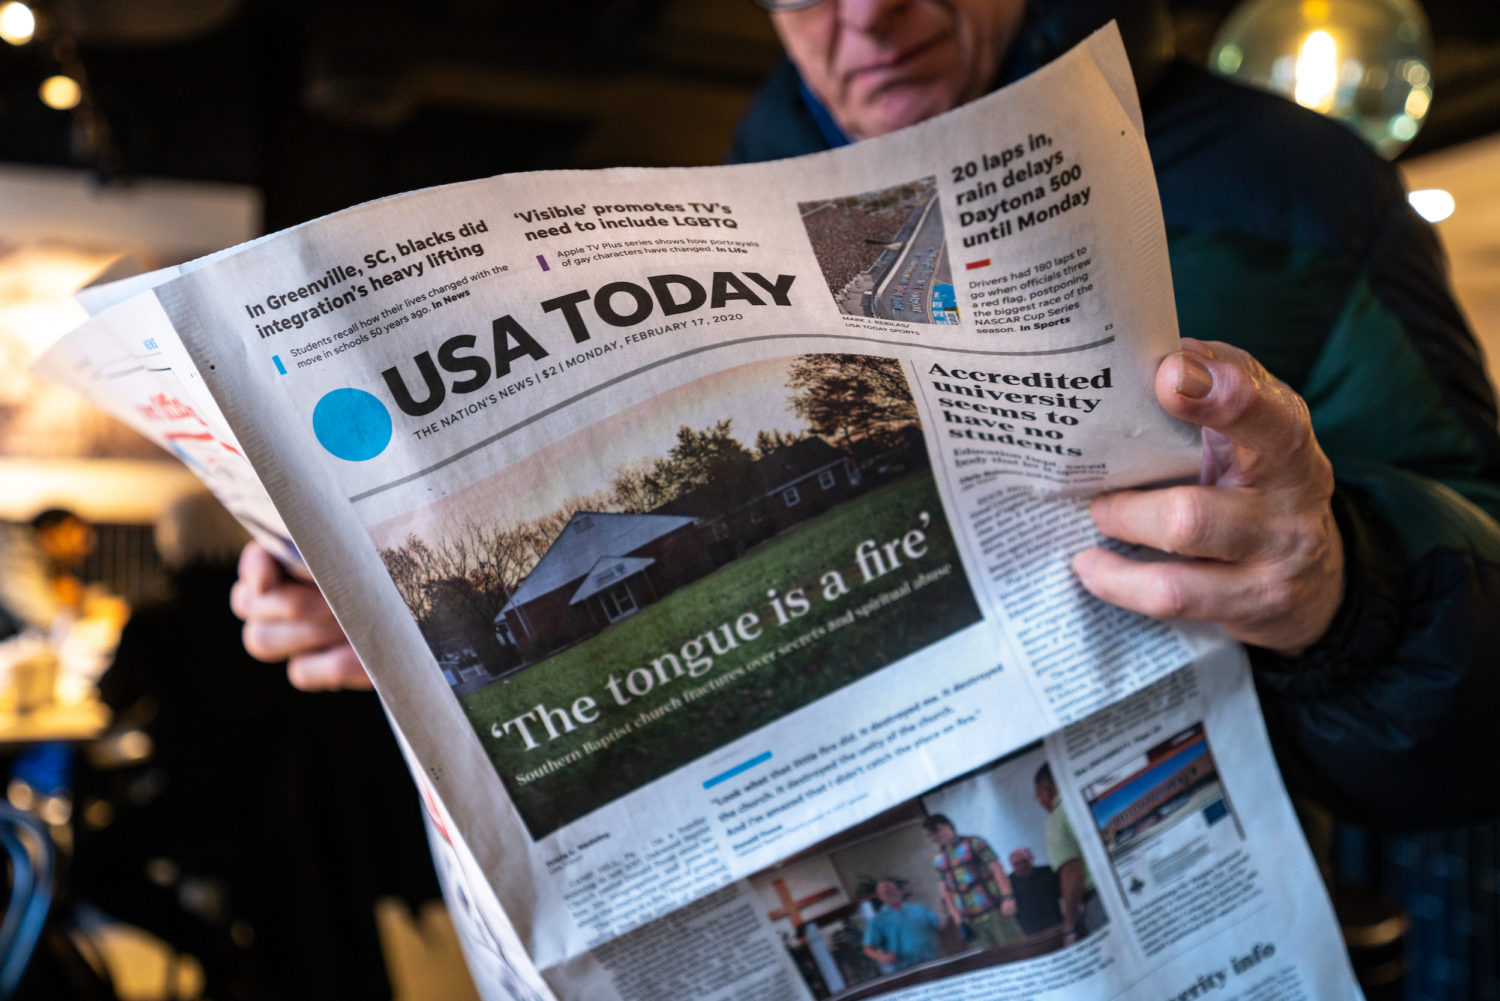 Mea culpa: The print edition of USA Today is still very much alive